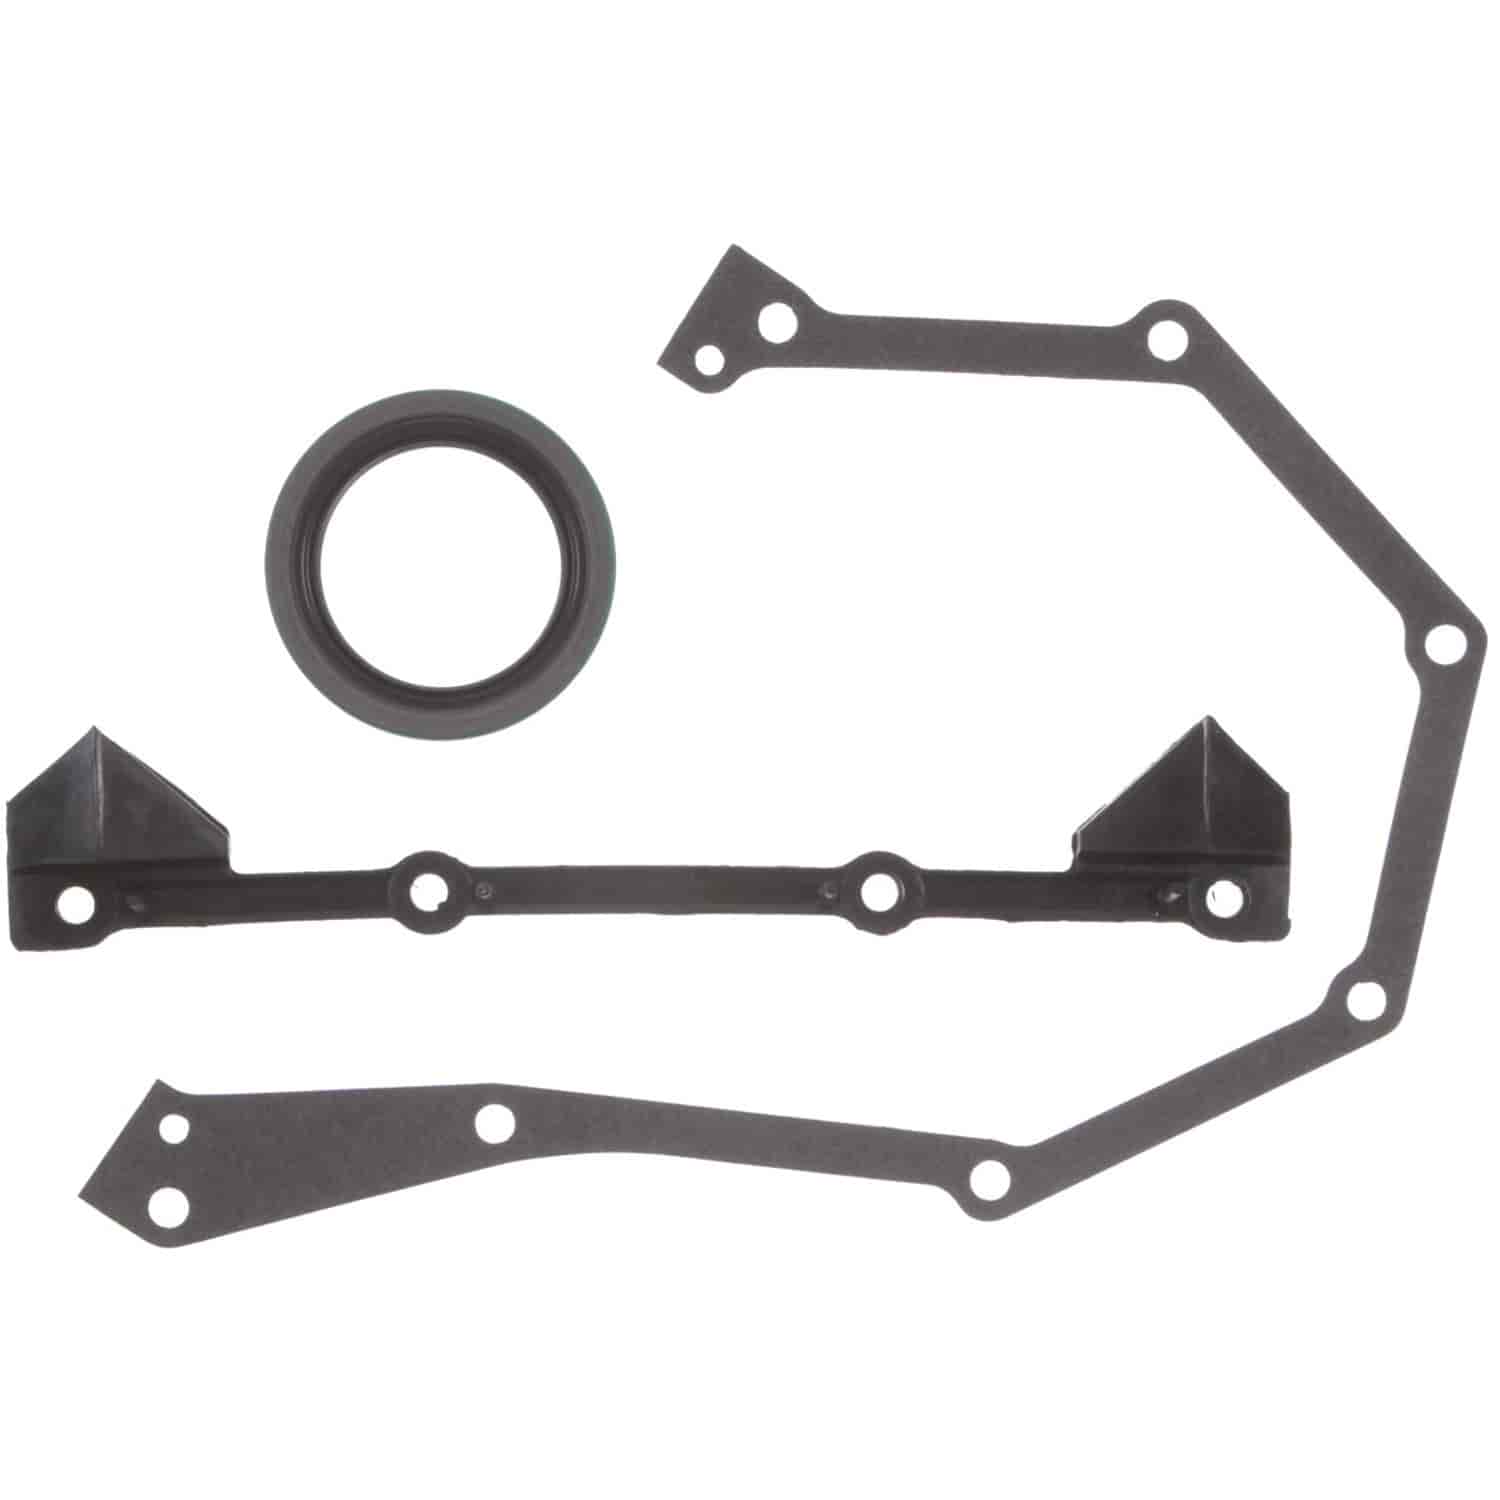 Timing Cover Set Chry-Pass&Ind Dod-Pass&Trk